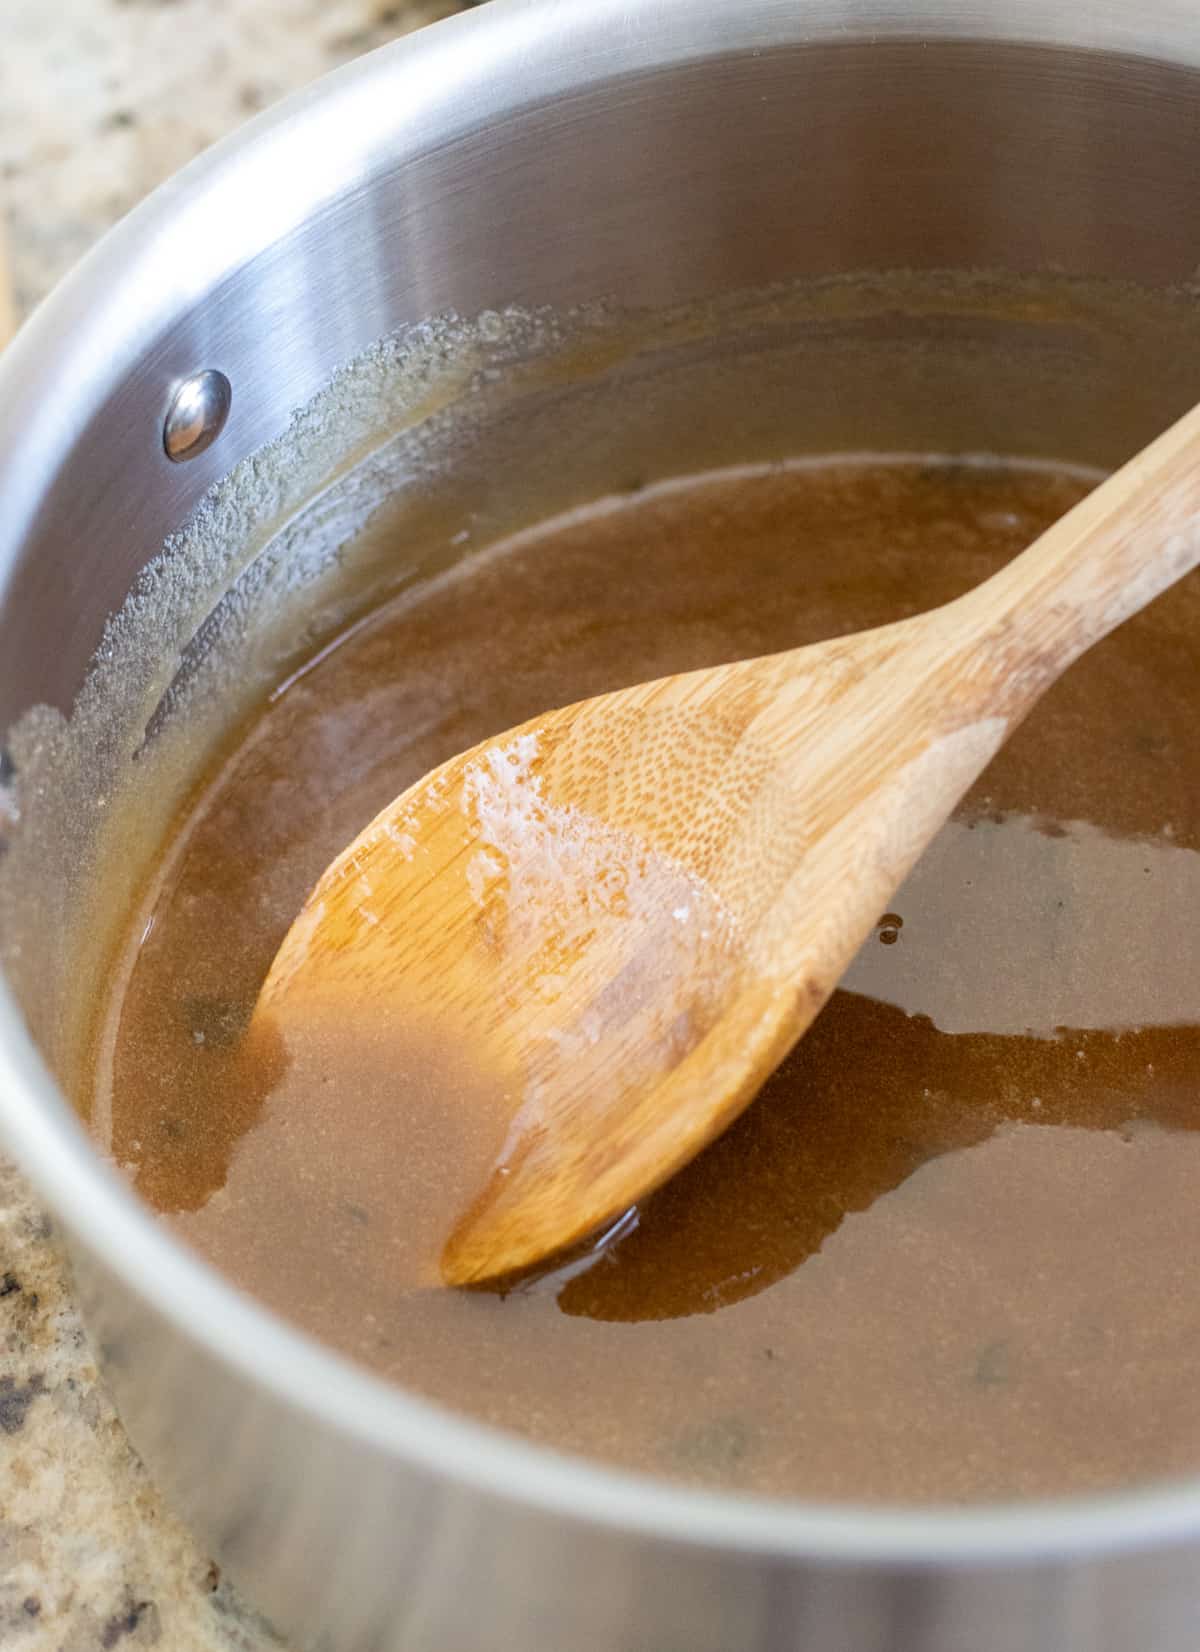 Honey brown sugar glaze in a saucepan with a wooden spoon.